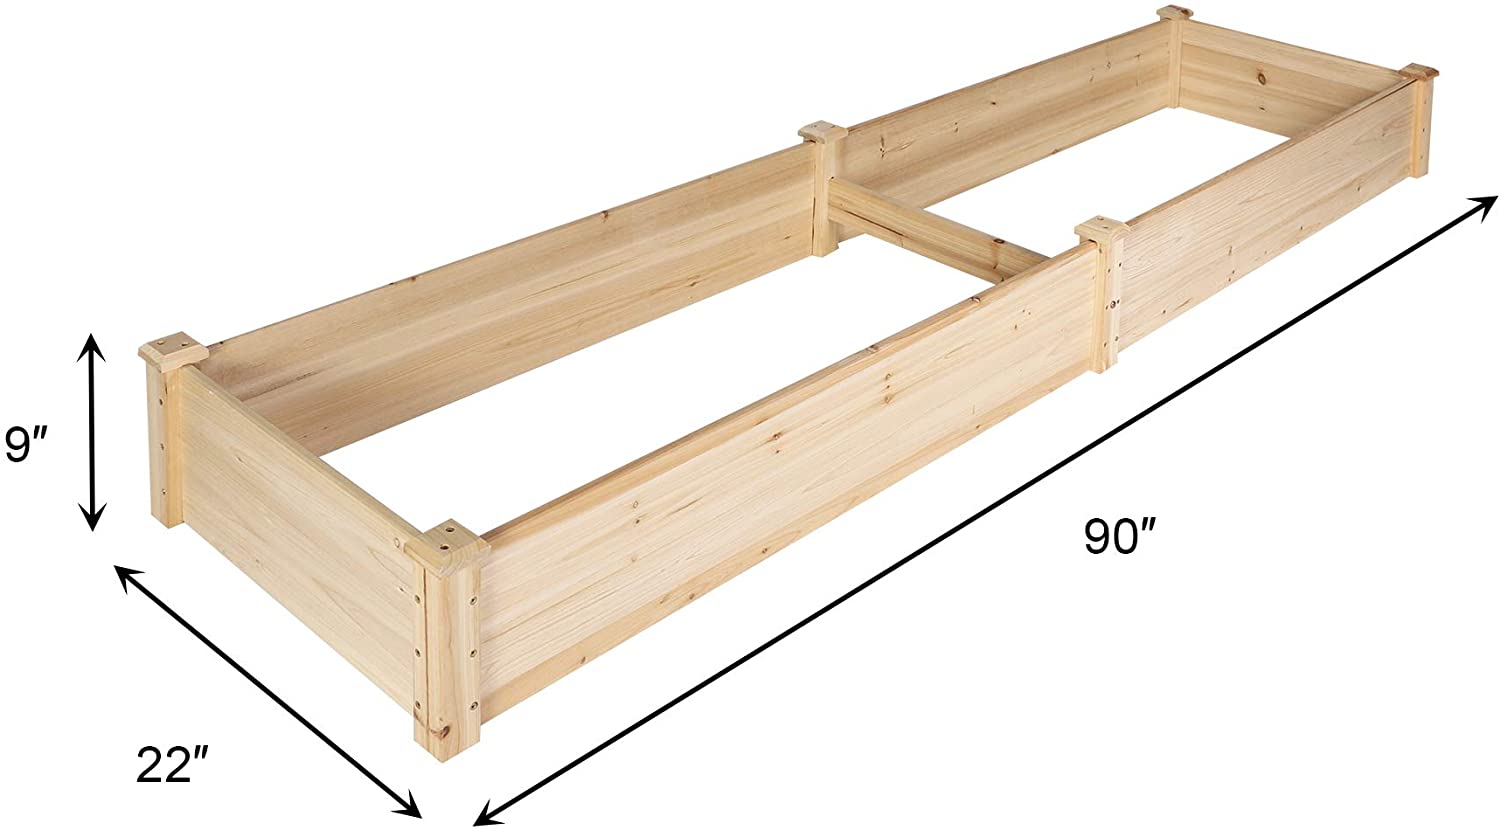 7.5 Feet Raised Garden Bed Wooden Planter Box 2 Separate Planting Space Heavy Duty Solid Fir Wood for Planting Flower Vegetable Fruit in Patio Backyard Balcony Outside,22”x9”x90”